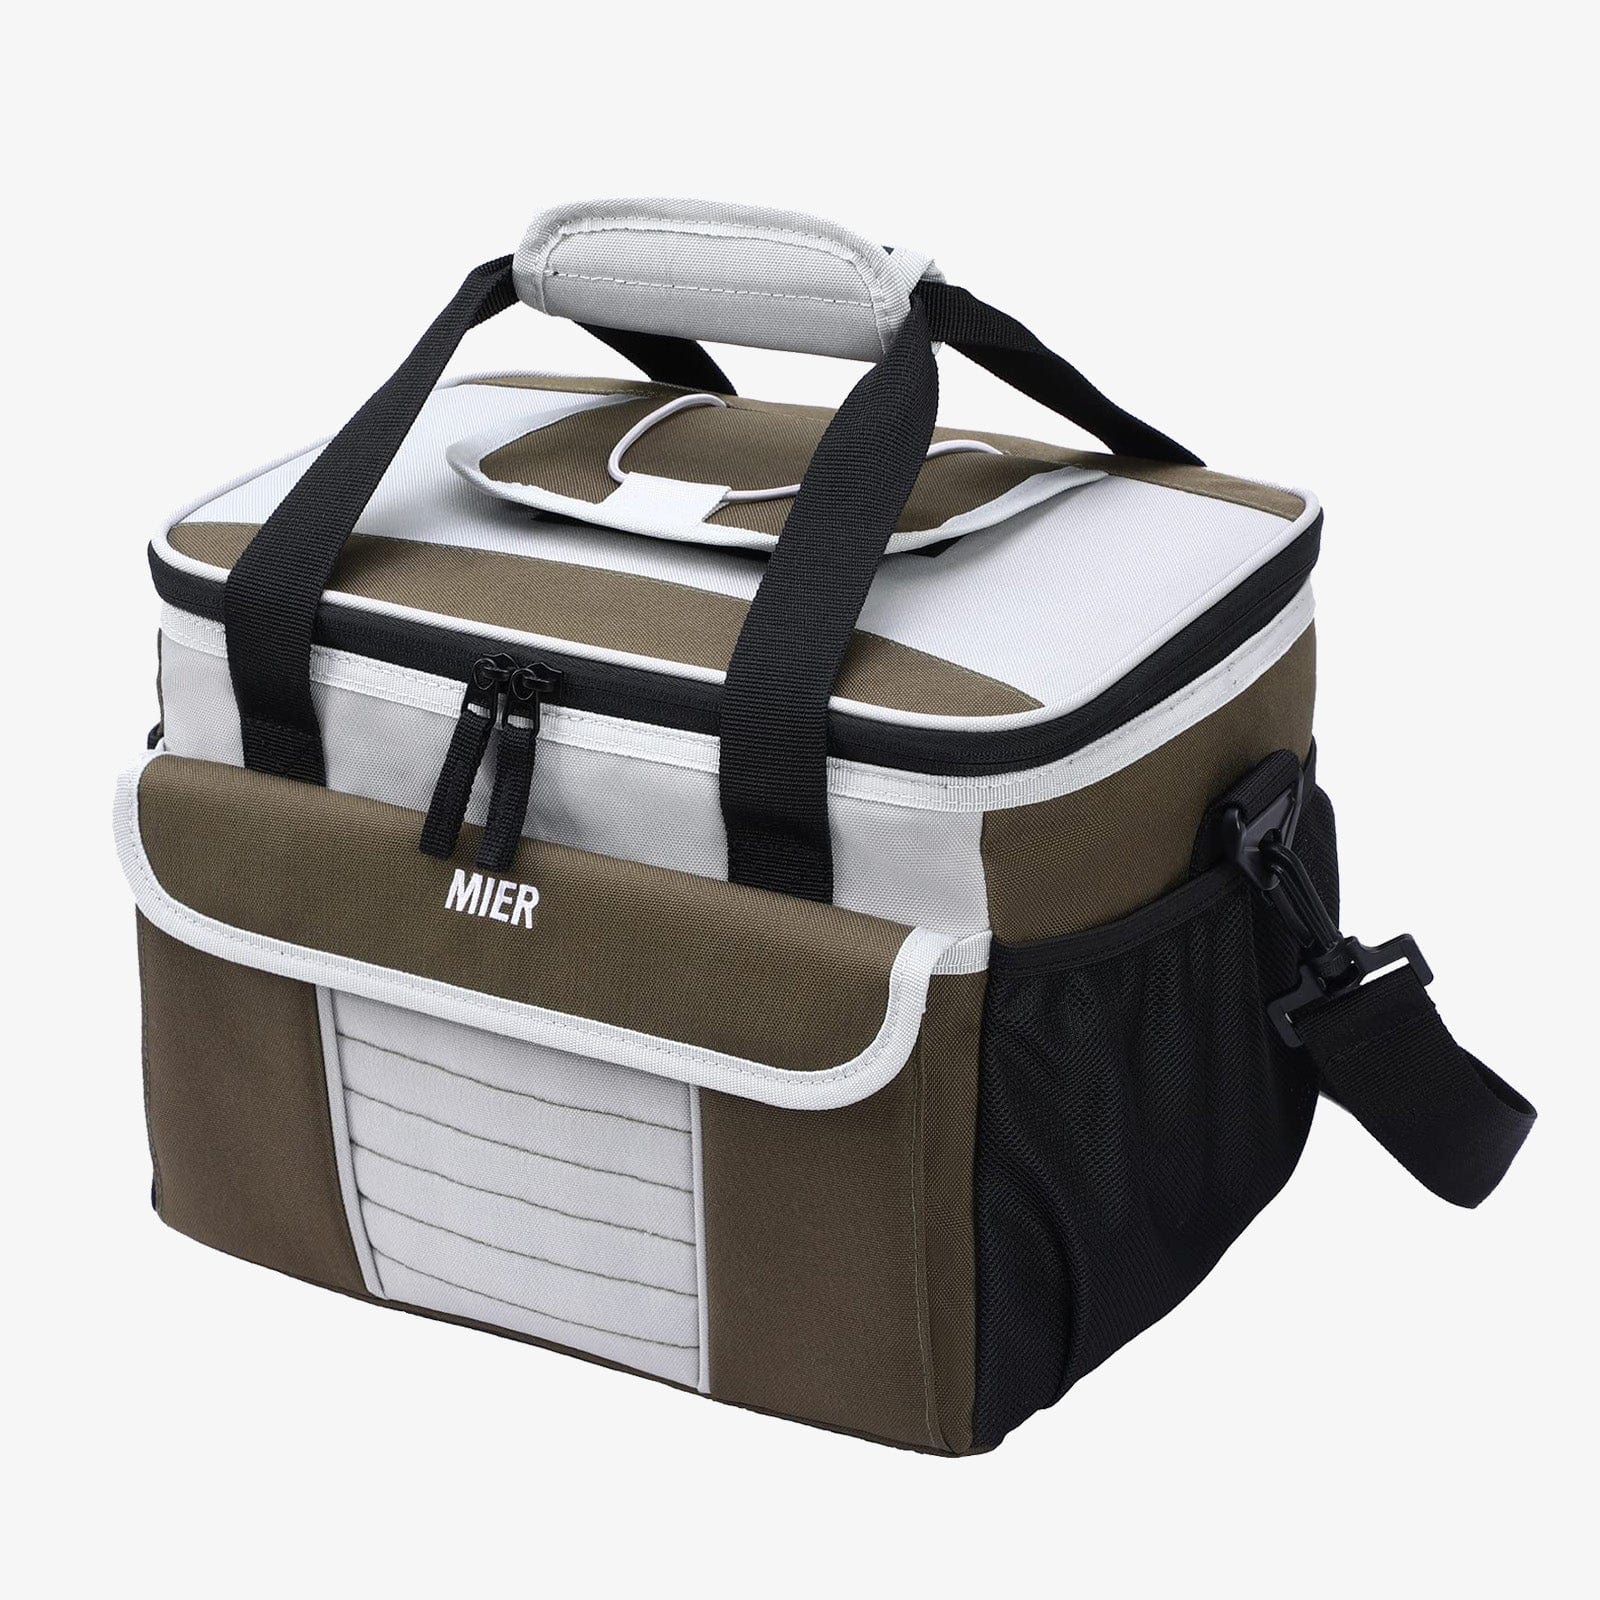 Large Soft Lunchbox Cooler Bag Insulated Lunch Bags for Adults Adult Lunch Bag Gray Green / 18 Can MIER